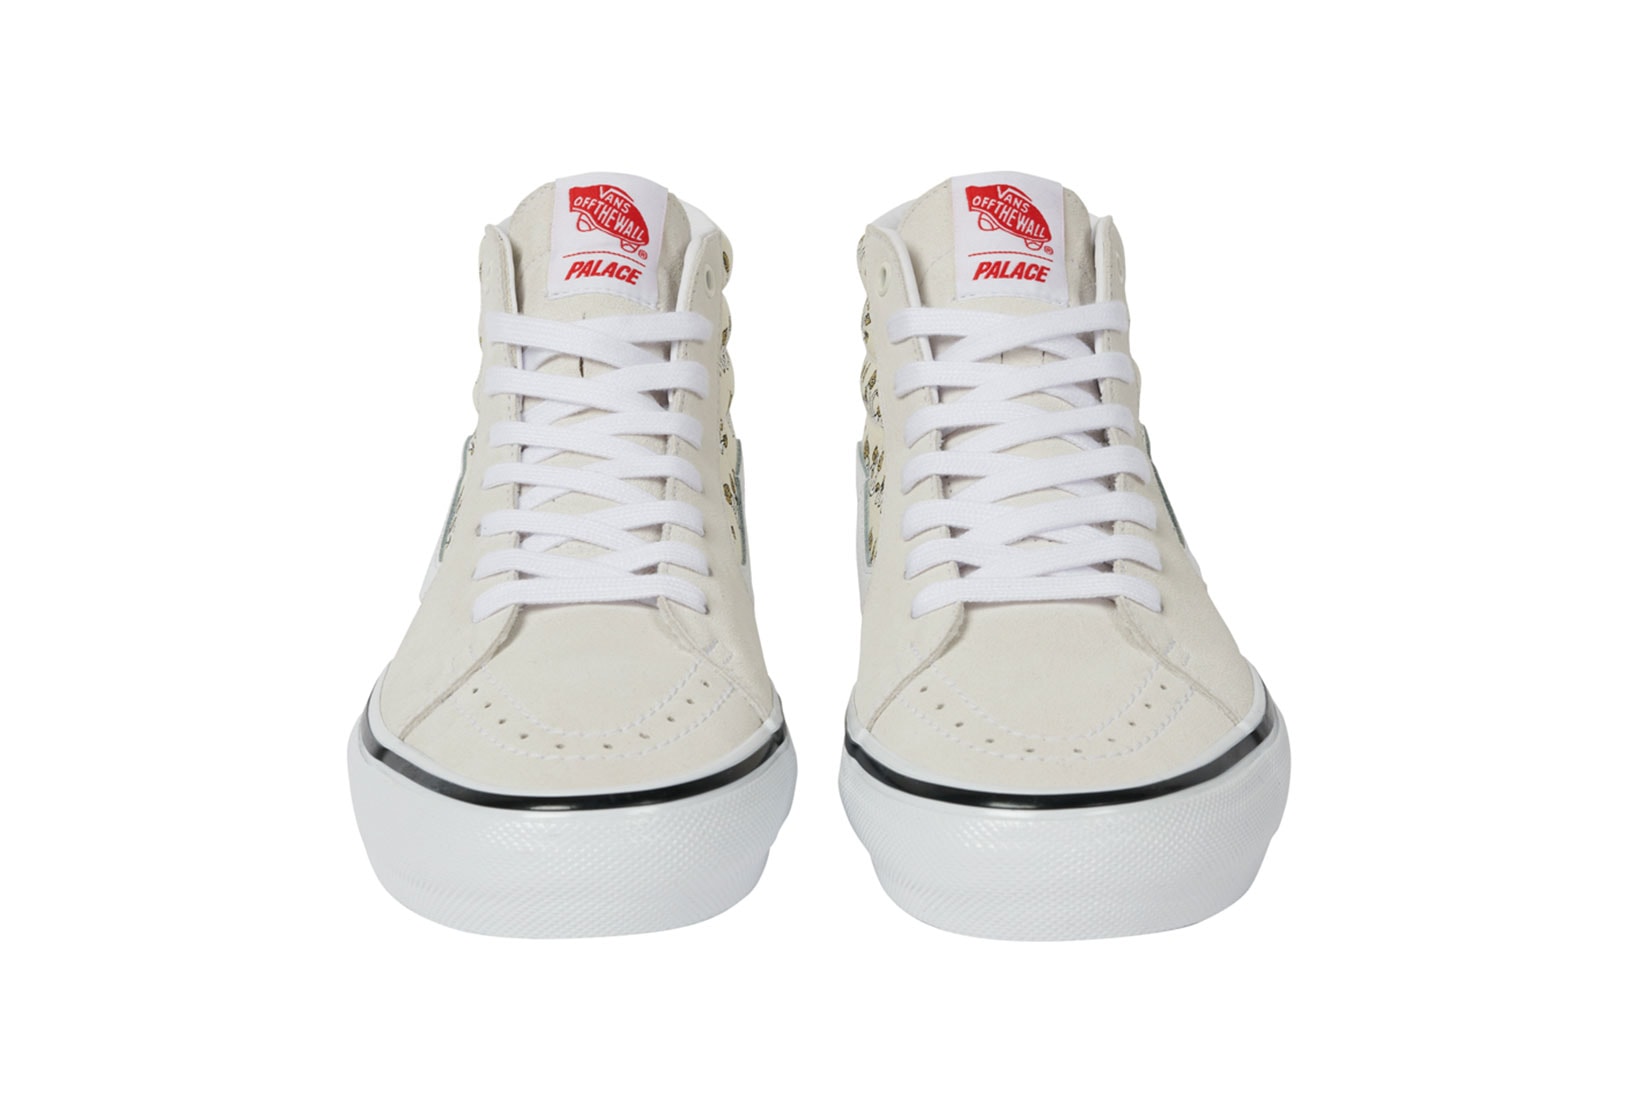 Palace Vans Sk8-Hi Shroom Collection Sneakers White Ivory Front Details